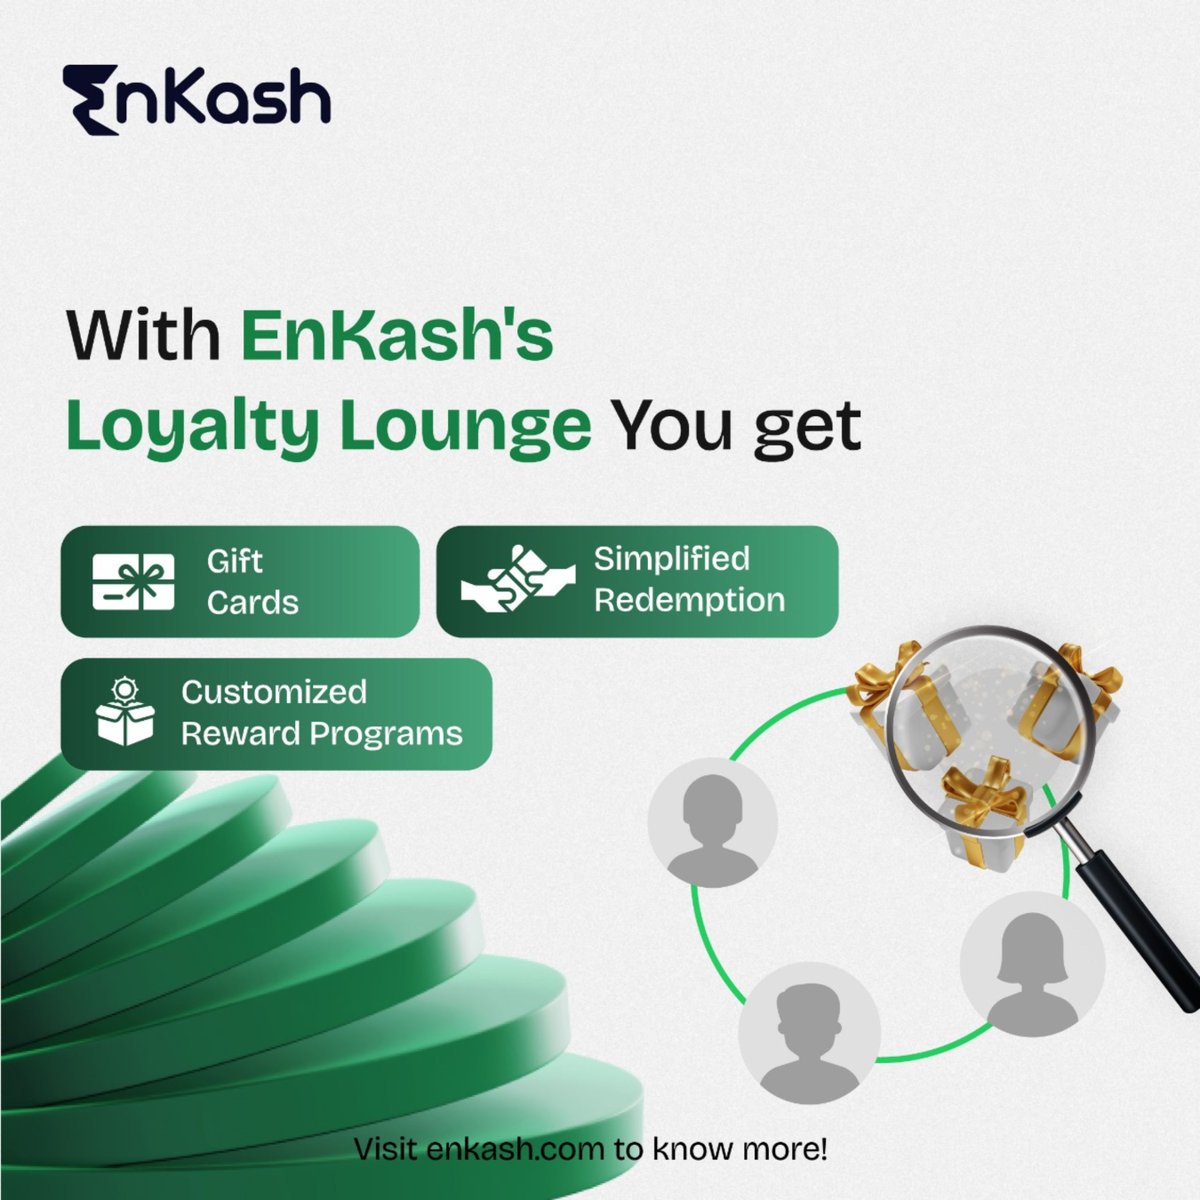 HRs, Celebrate every milestone with EnKash’s Loyalty Lounge, delivering personalized recognition and delightful gifts🎁 for your team's achievements! 🌟 #Hr #humanresources #corporate #rewards #corporatelife